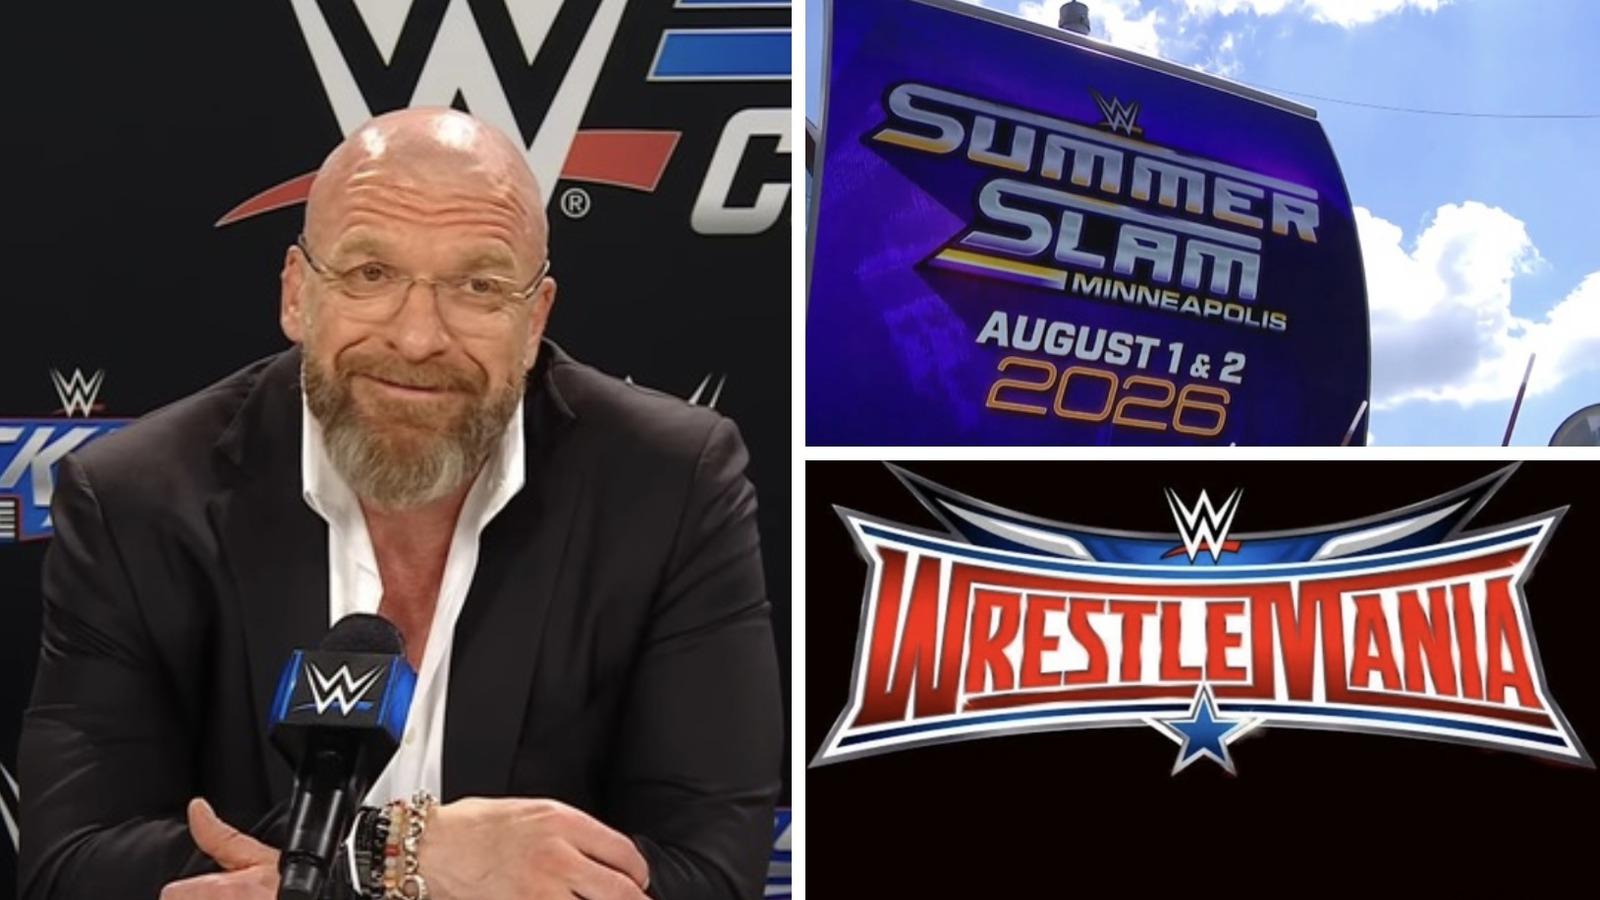 WWE’s decision to make SummerSlam a two-day event hints at future WrestleMania plans